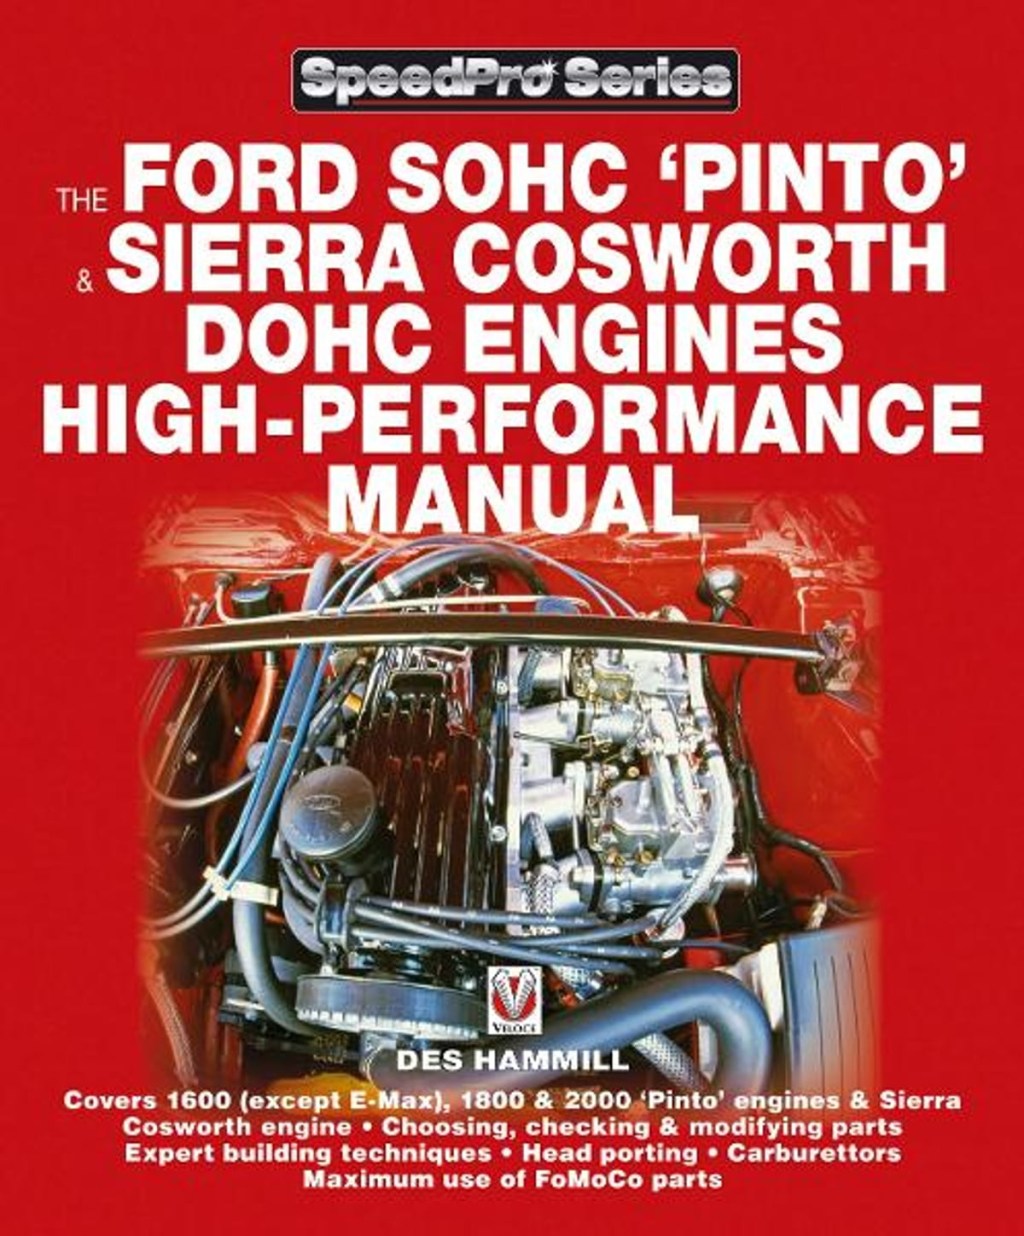 Picture of: The Ford SOHC Pinto & Sierra Cosworth DOHC Engines high-peformance